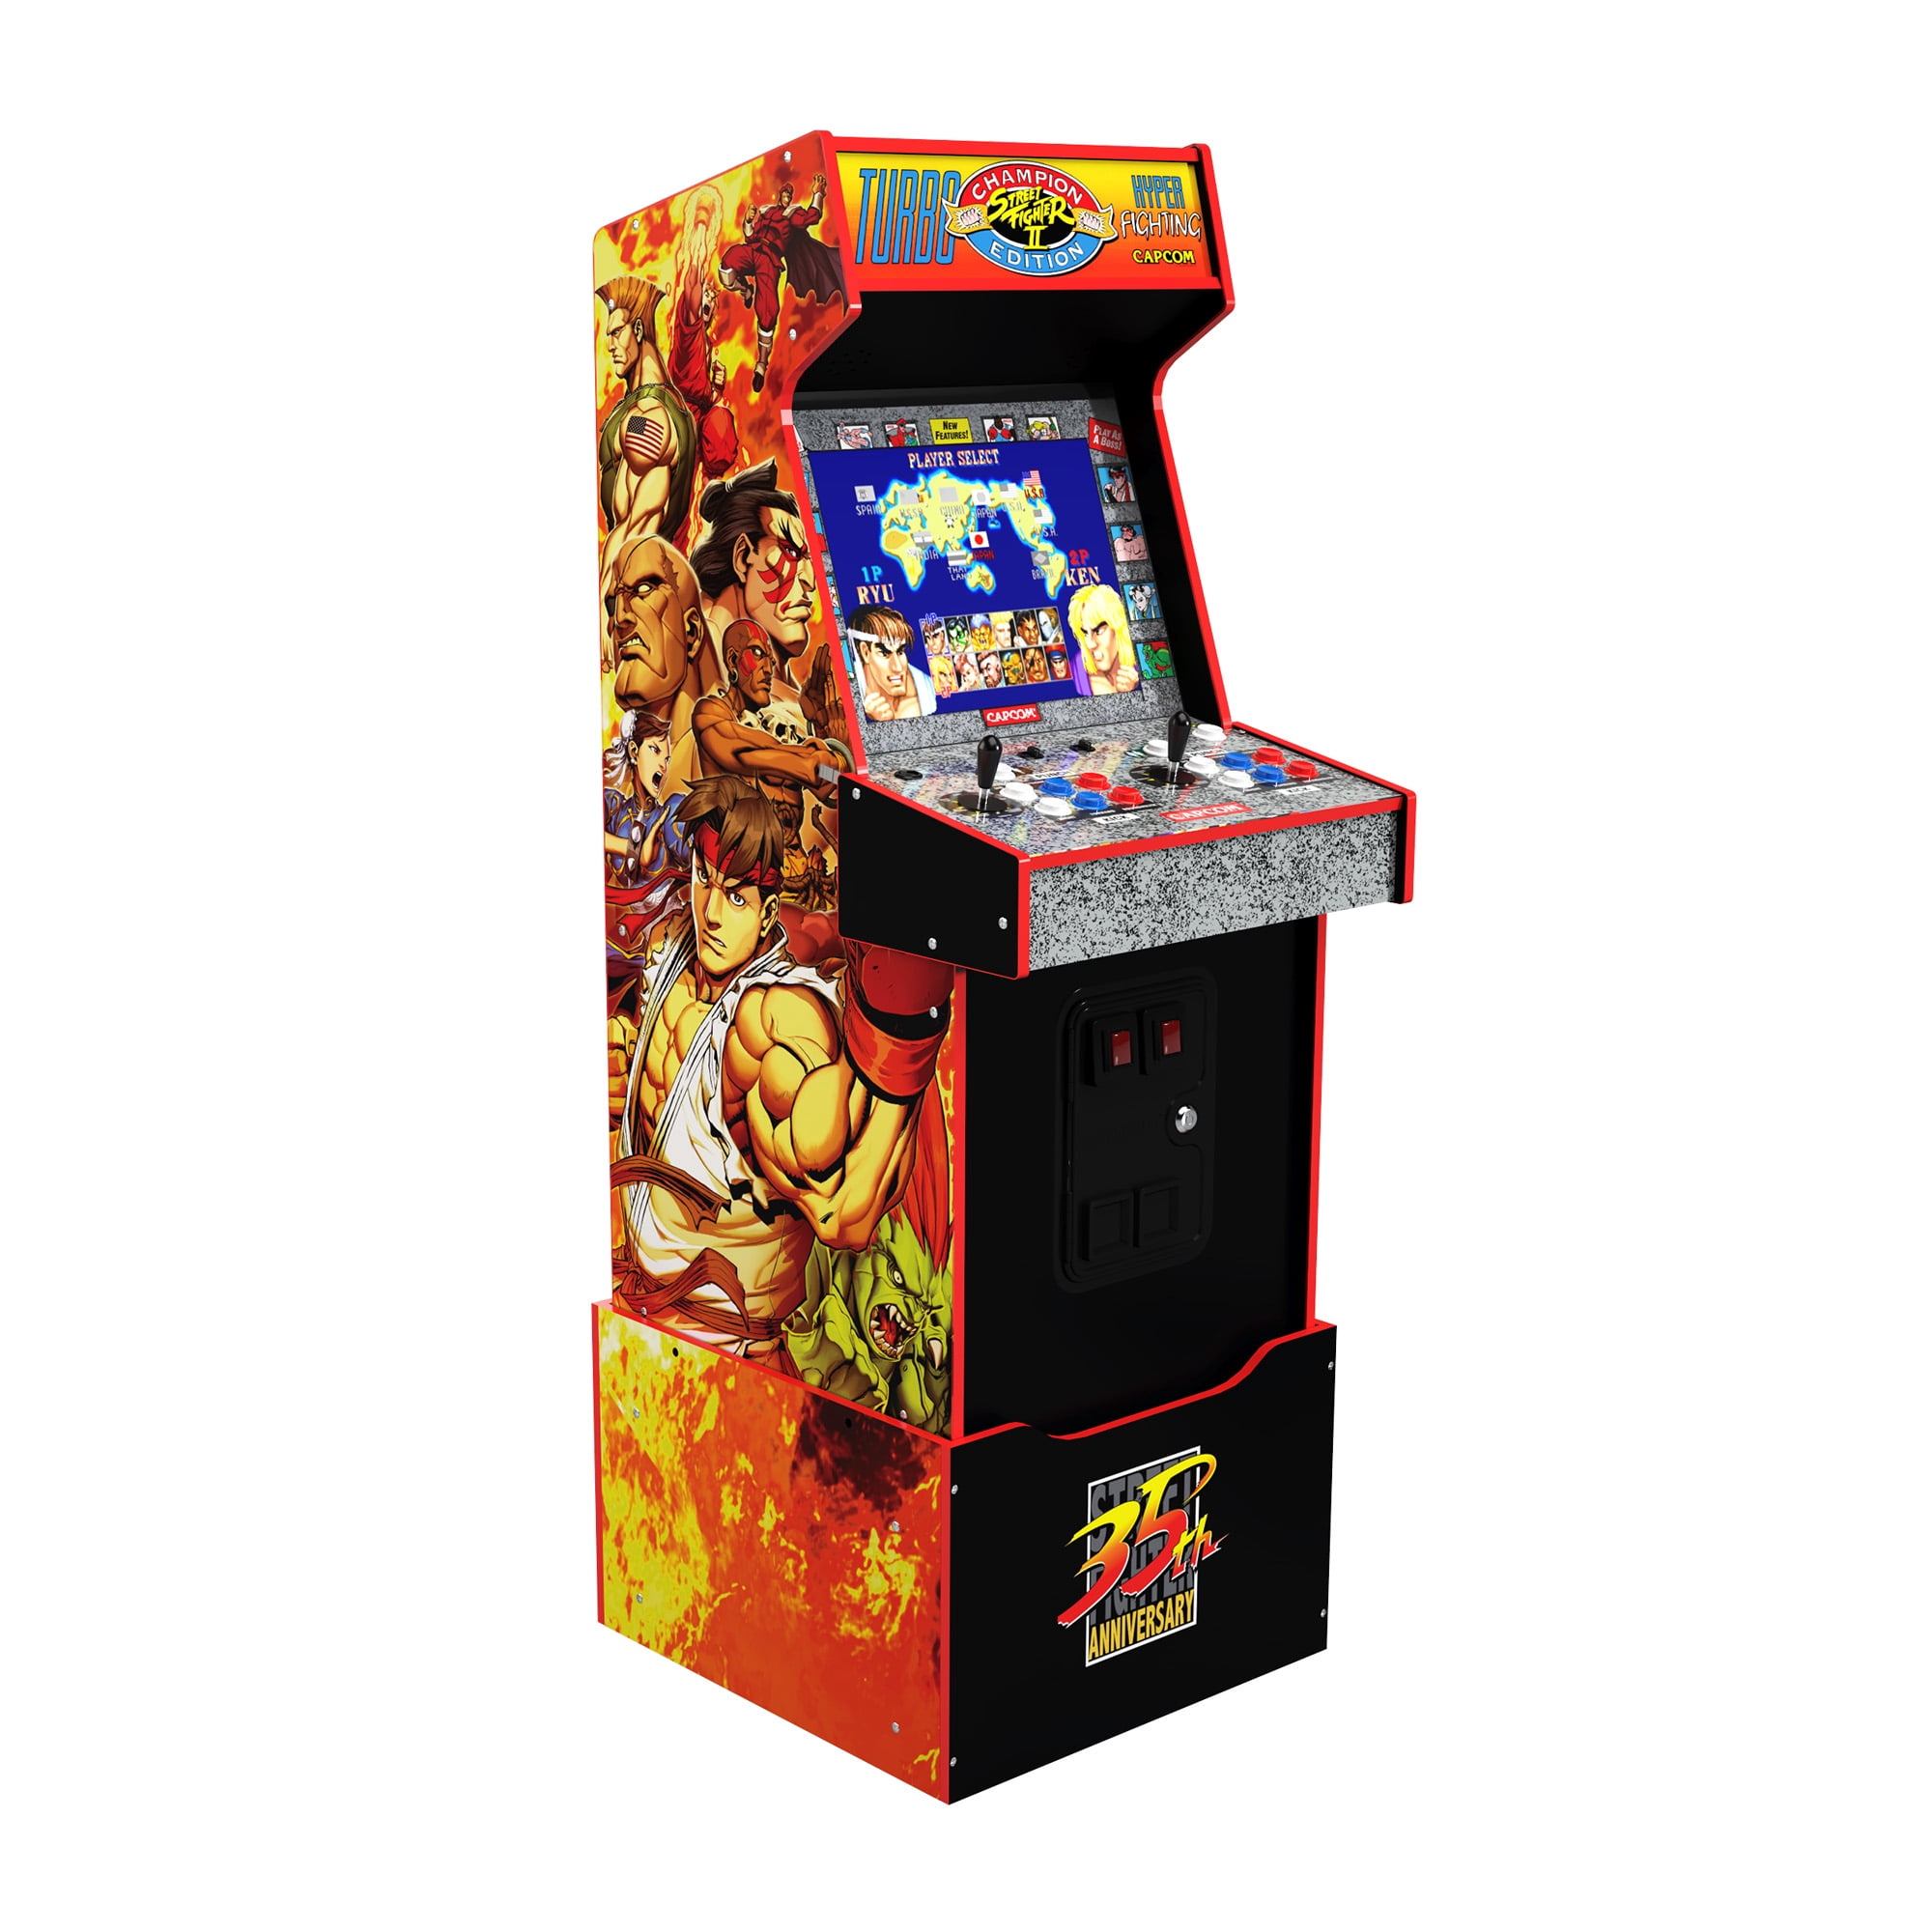 Arcade1UP 14 Games in 1, Street Fighter II Turbo: Hyper Fighting, Legacy Video Game Arcade with Riser and Wi-Fi Live